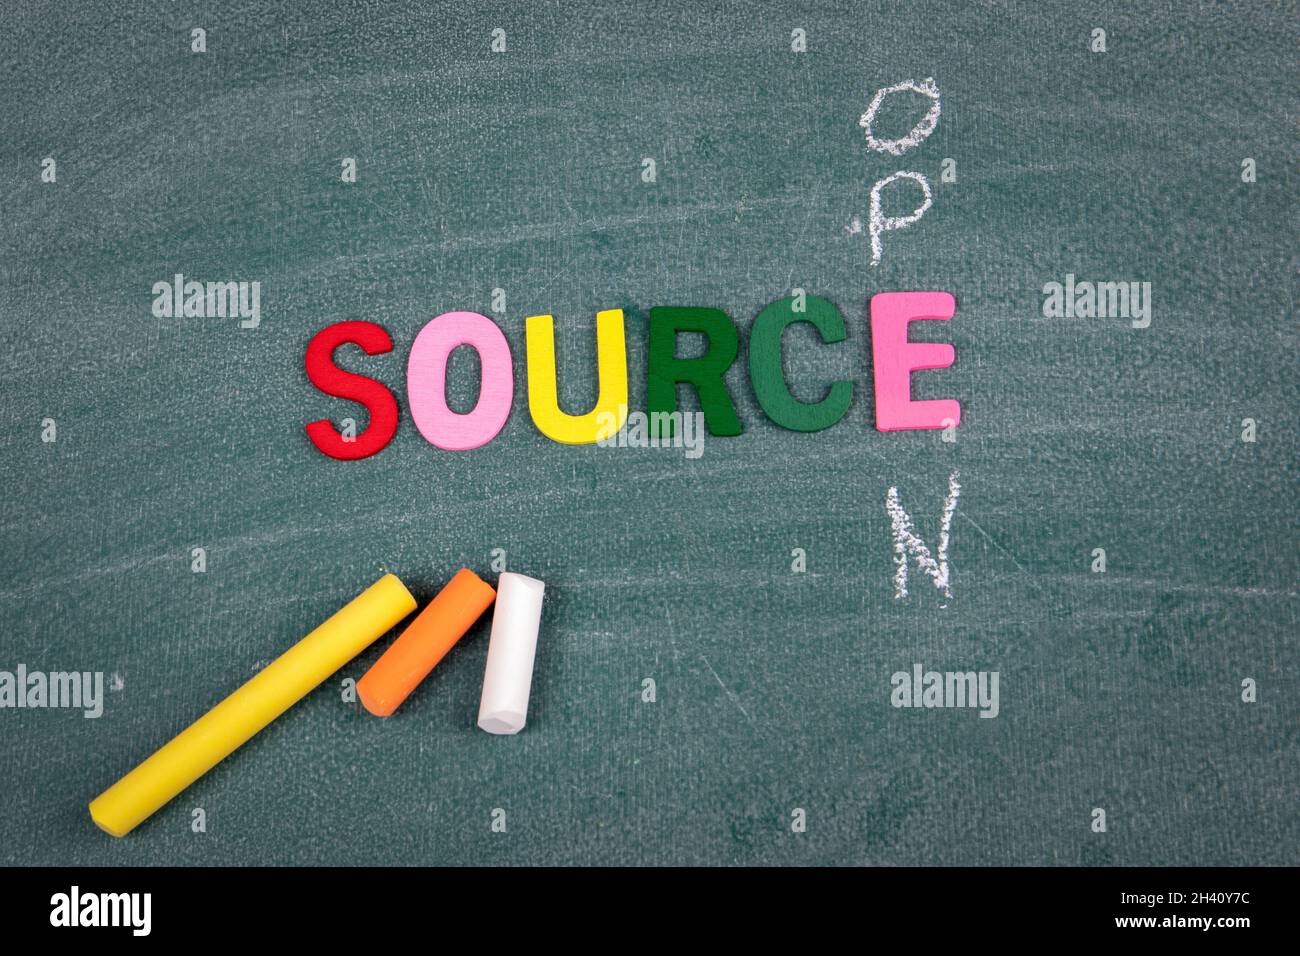 Open Source. Colored wooden letters and pieces of chalk on a green board. Stock Photo